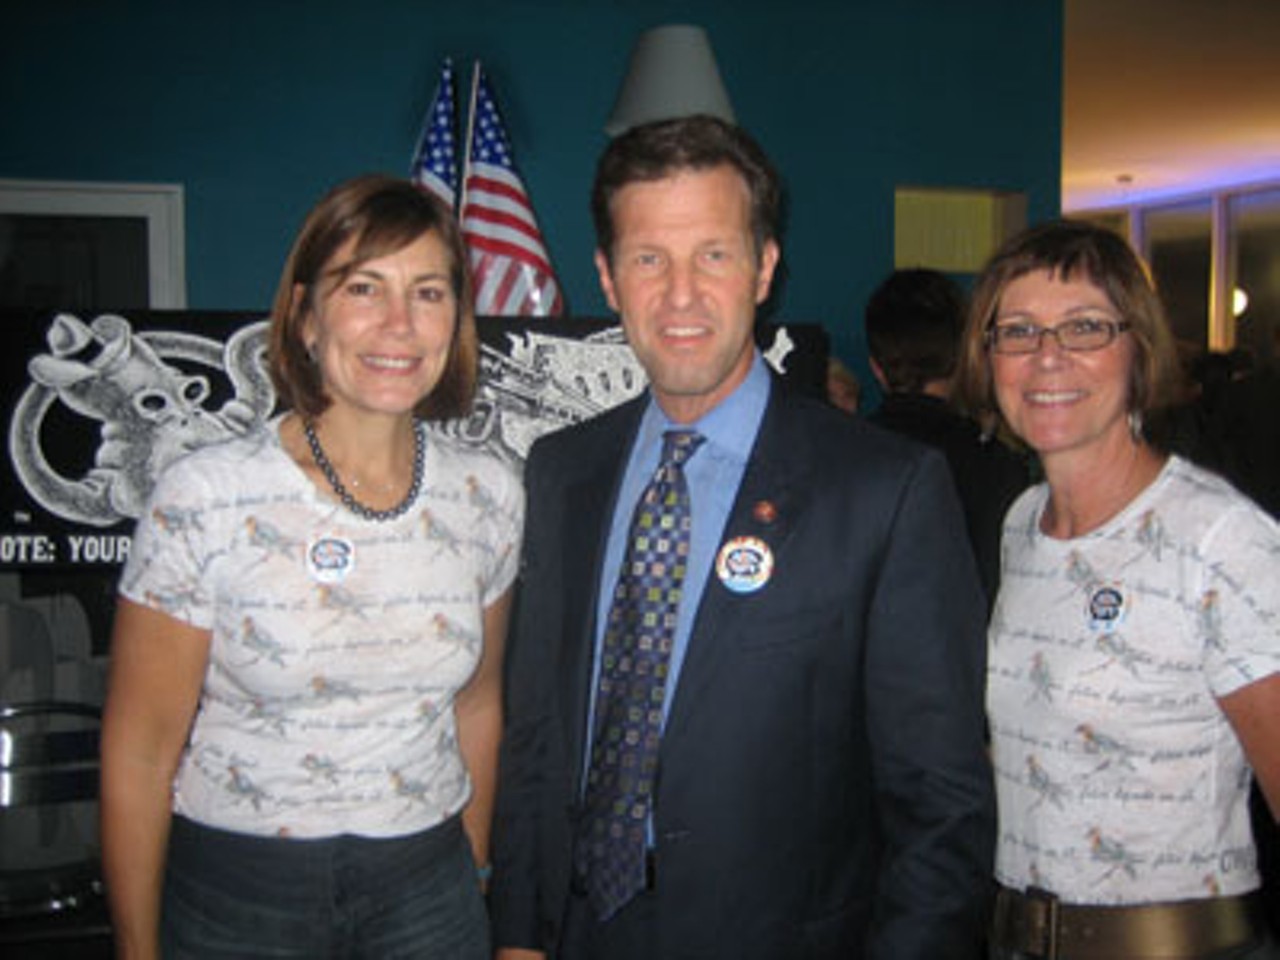 Carnahan at Art the Vote: U.S. Rep. Russ Carnahan with Mary McElwain and Sue Mccollum, Art the Vote volunteers, stand in front of artwork by Tom Huck encouraging people to register to vote.